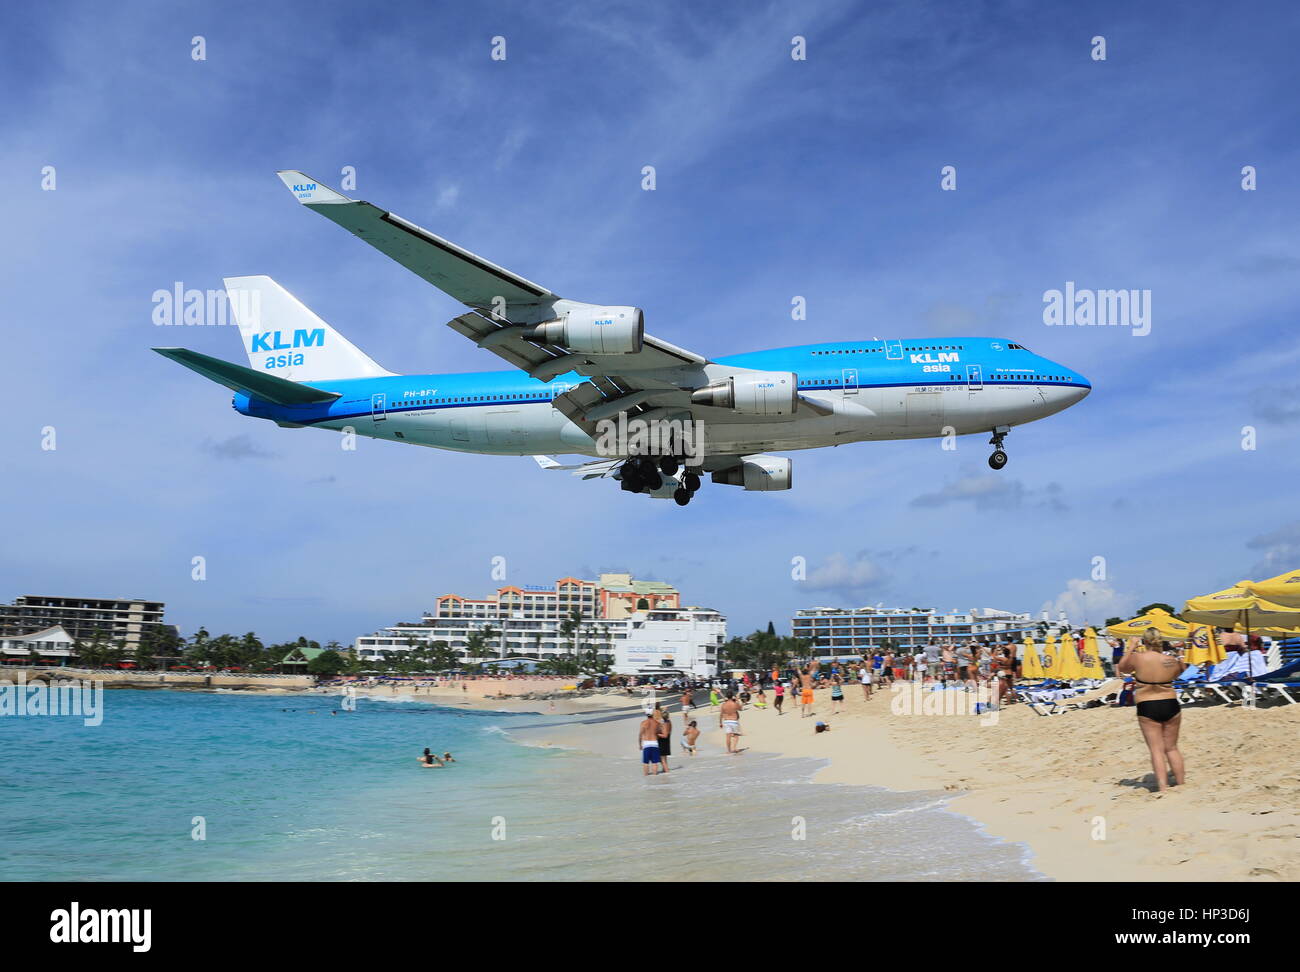 A KLM Boeing 747 landing at the famous Princess Juliana International Airport in St. Maarten Stock Photo